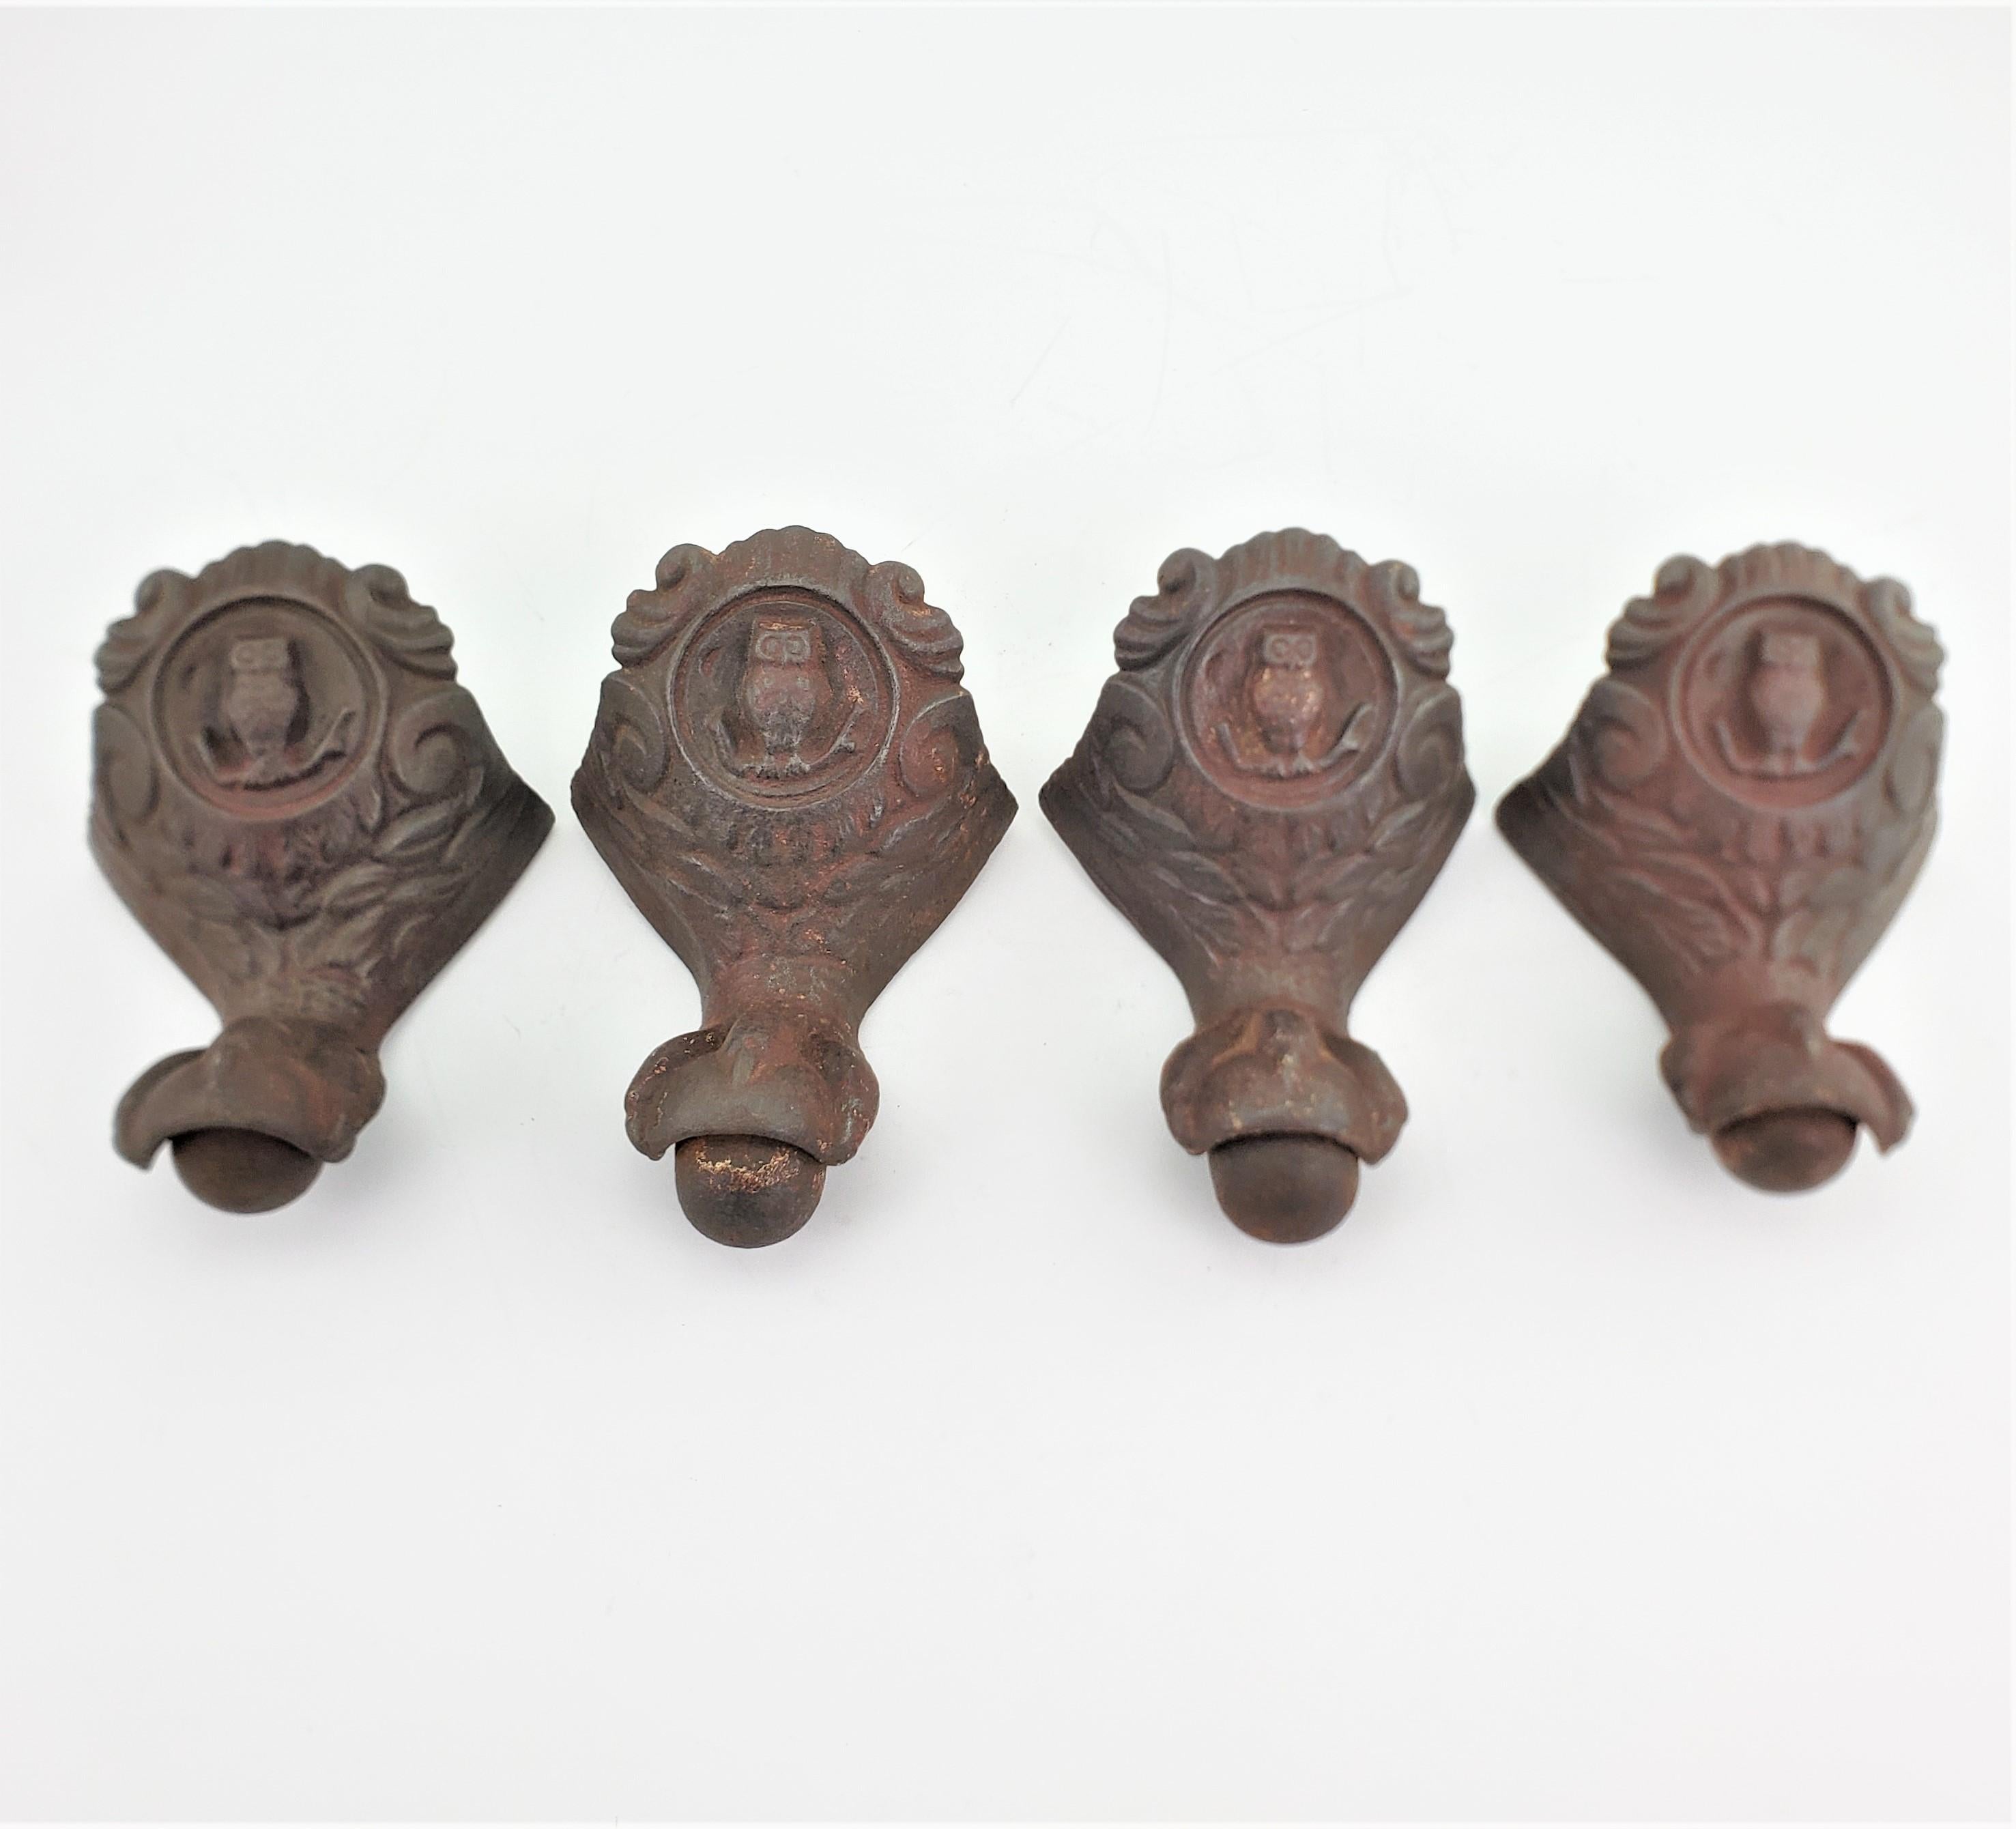 This set of four antique cast iron claw tub feet are unsigned, but presumed to have been made in the United States in approximately 1880 in the period Victorian style. The legs are ornately cast in iron with remnants of a brass toned patina, and are